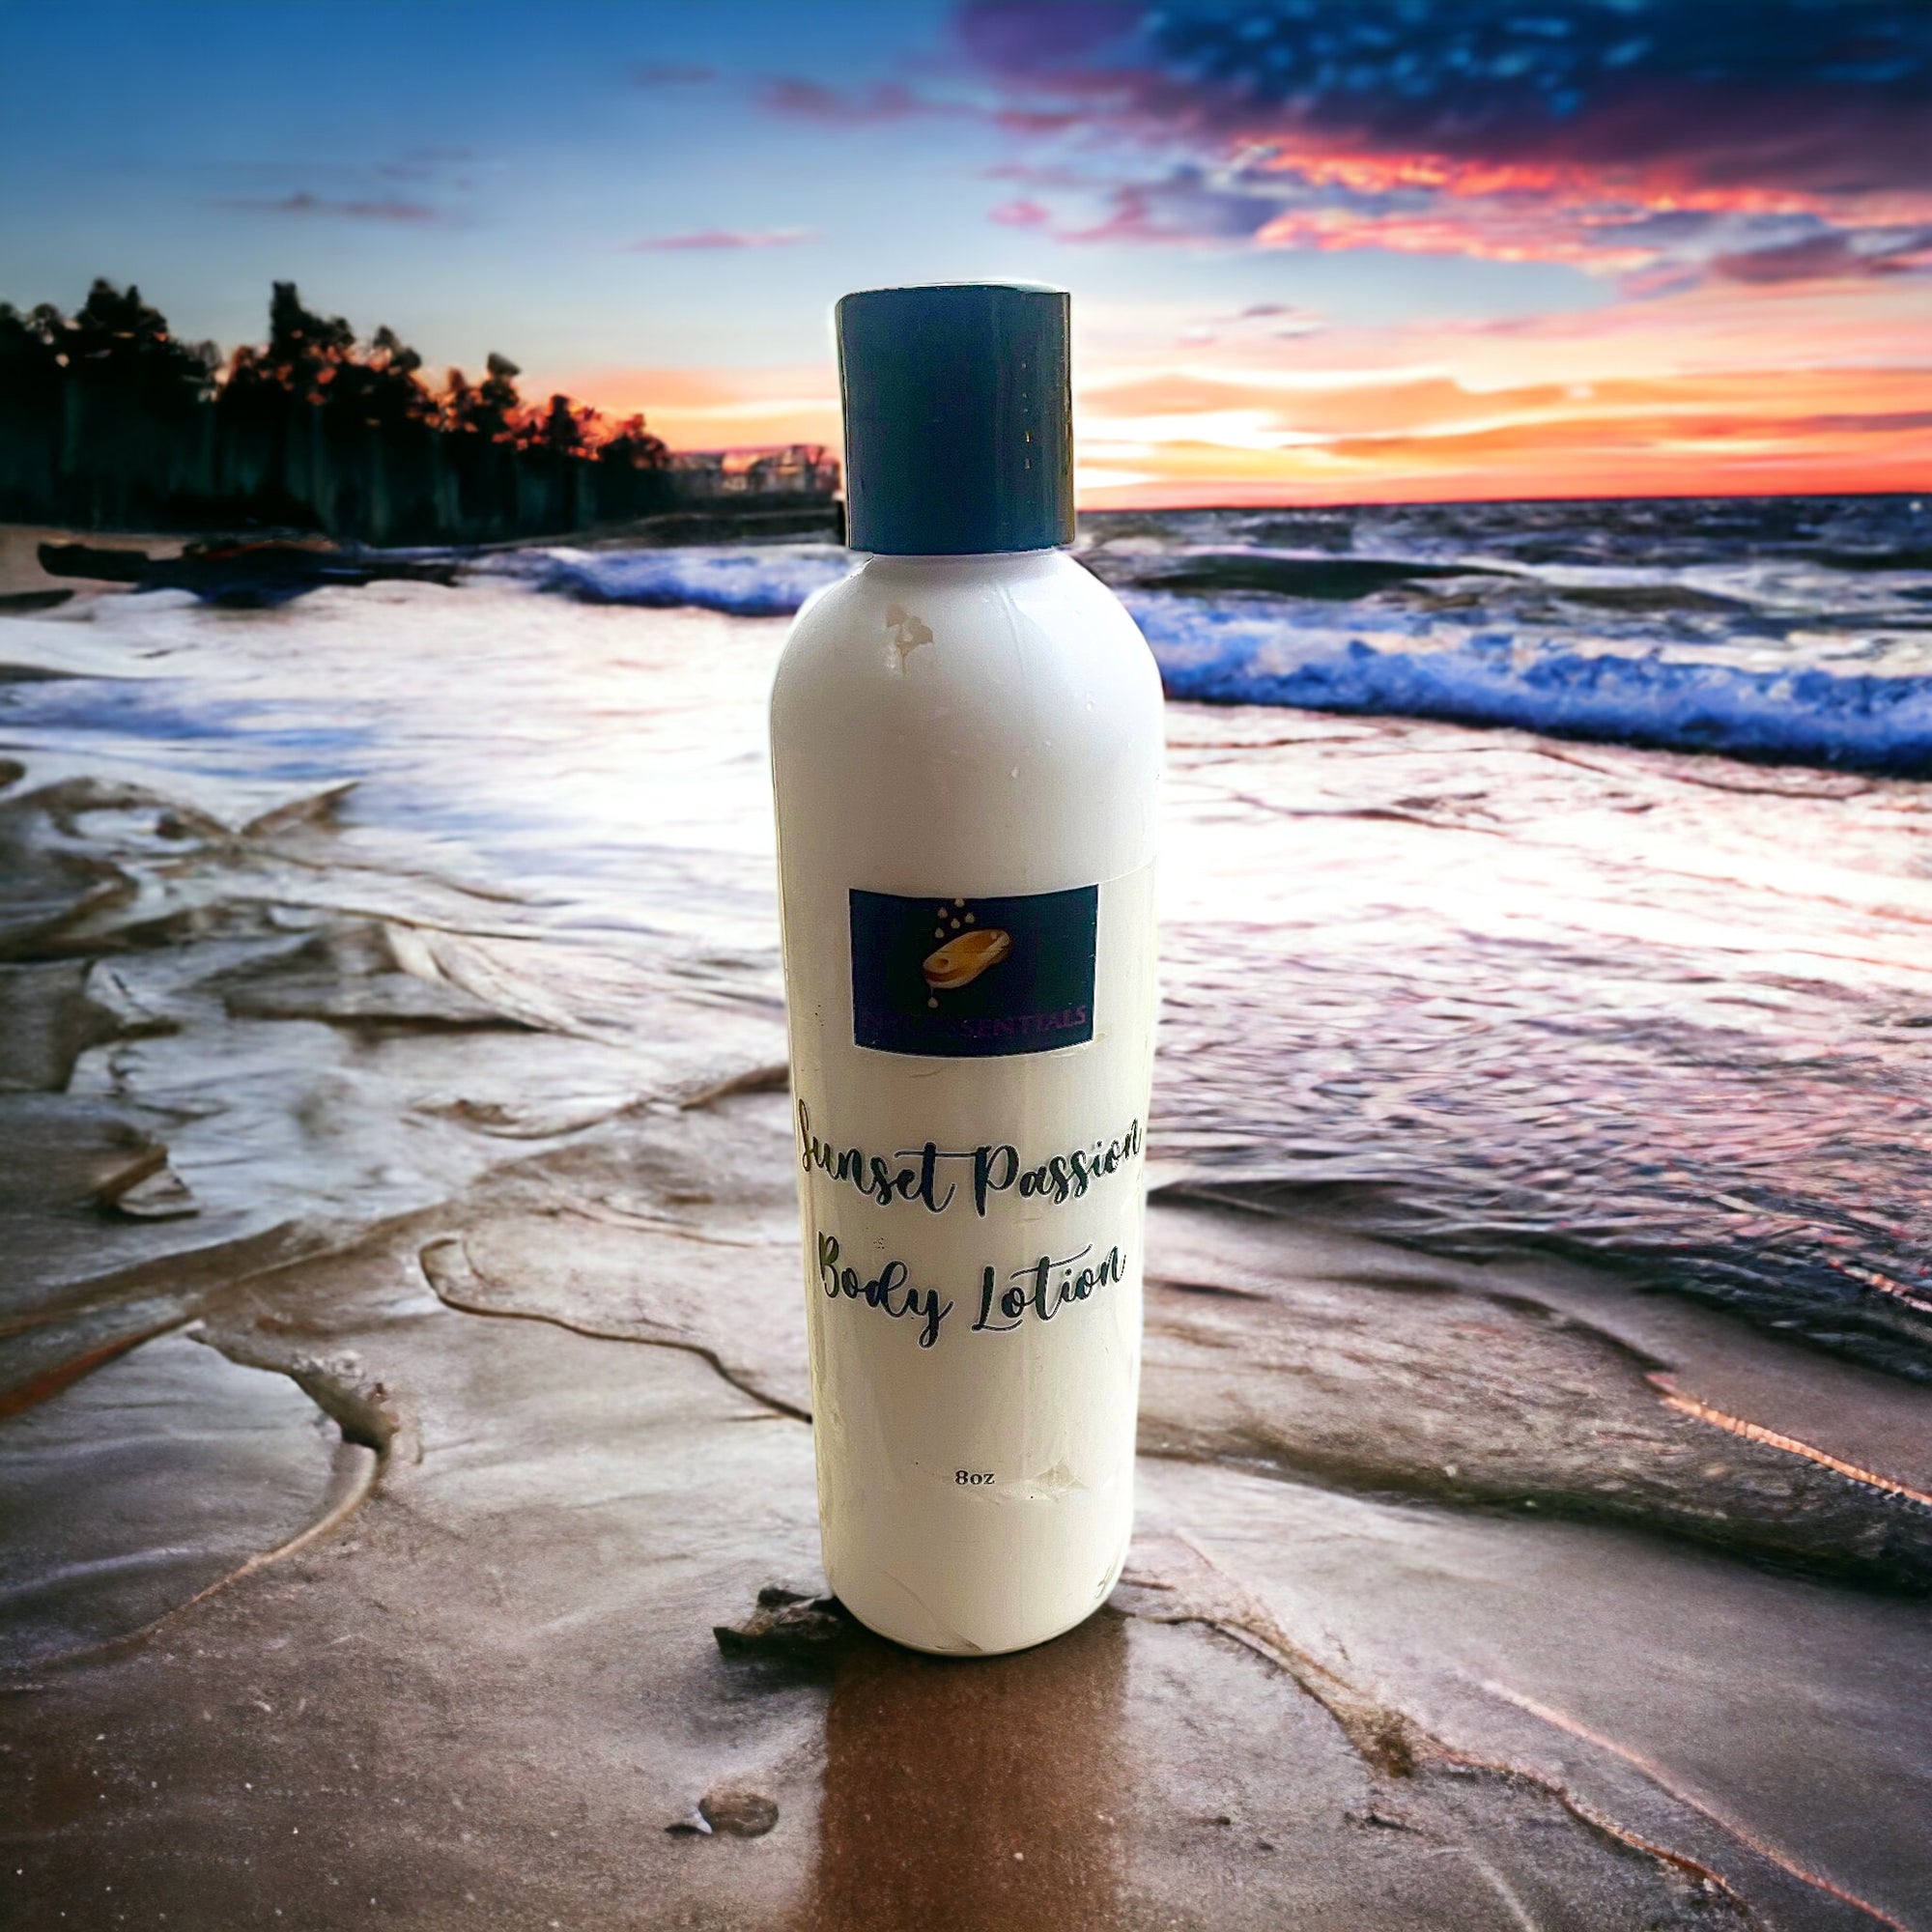 Sunset Passion Body Lotion